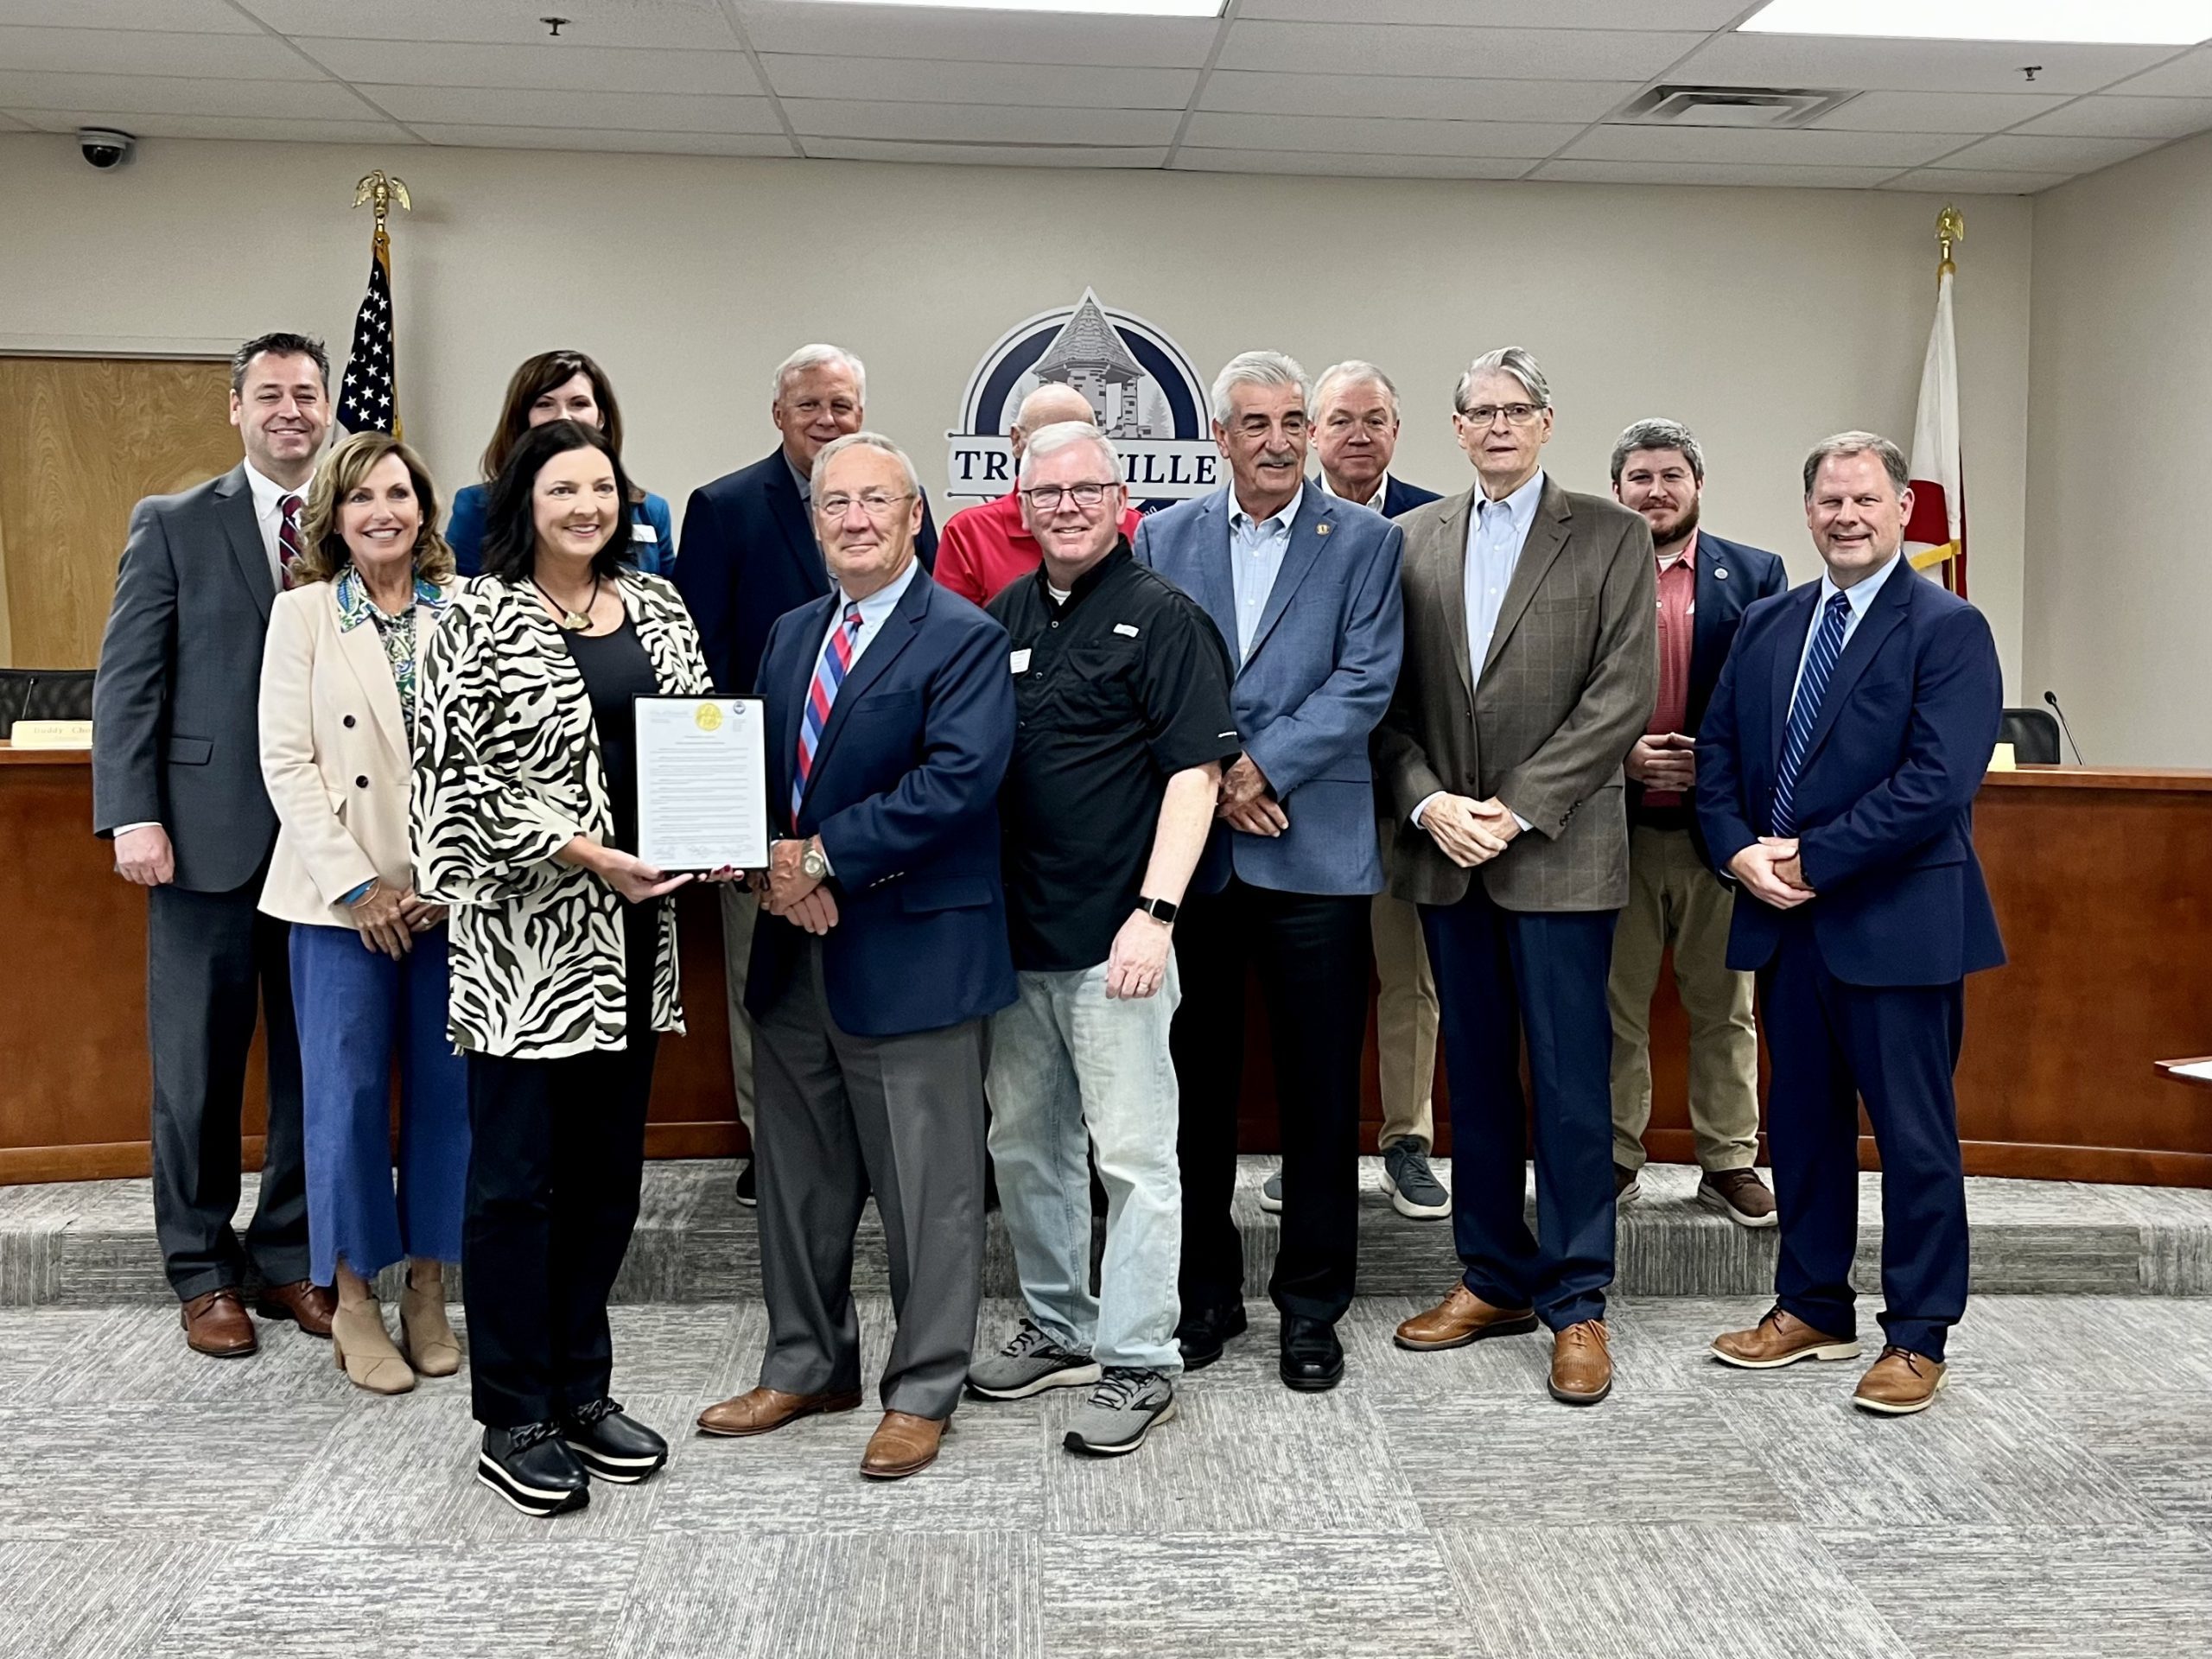 Trussville Council recognizes Dispatcher of the Year, World Polio Day